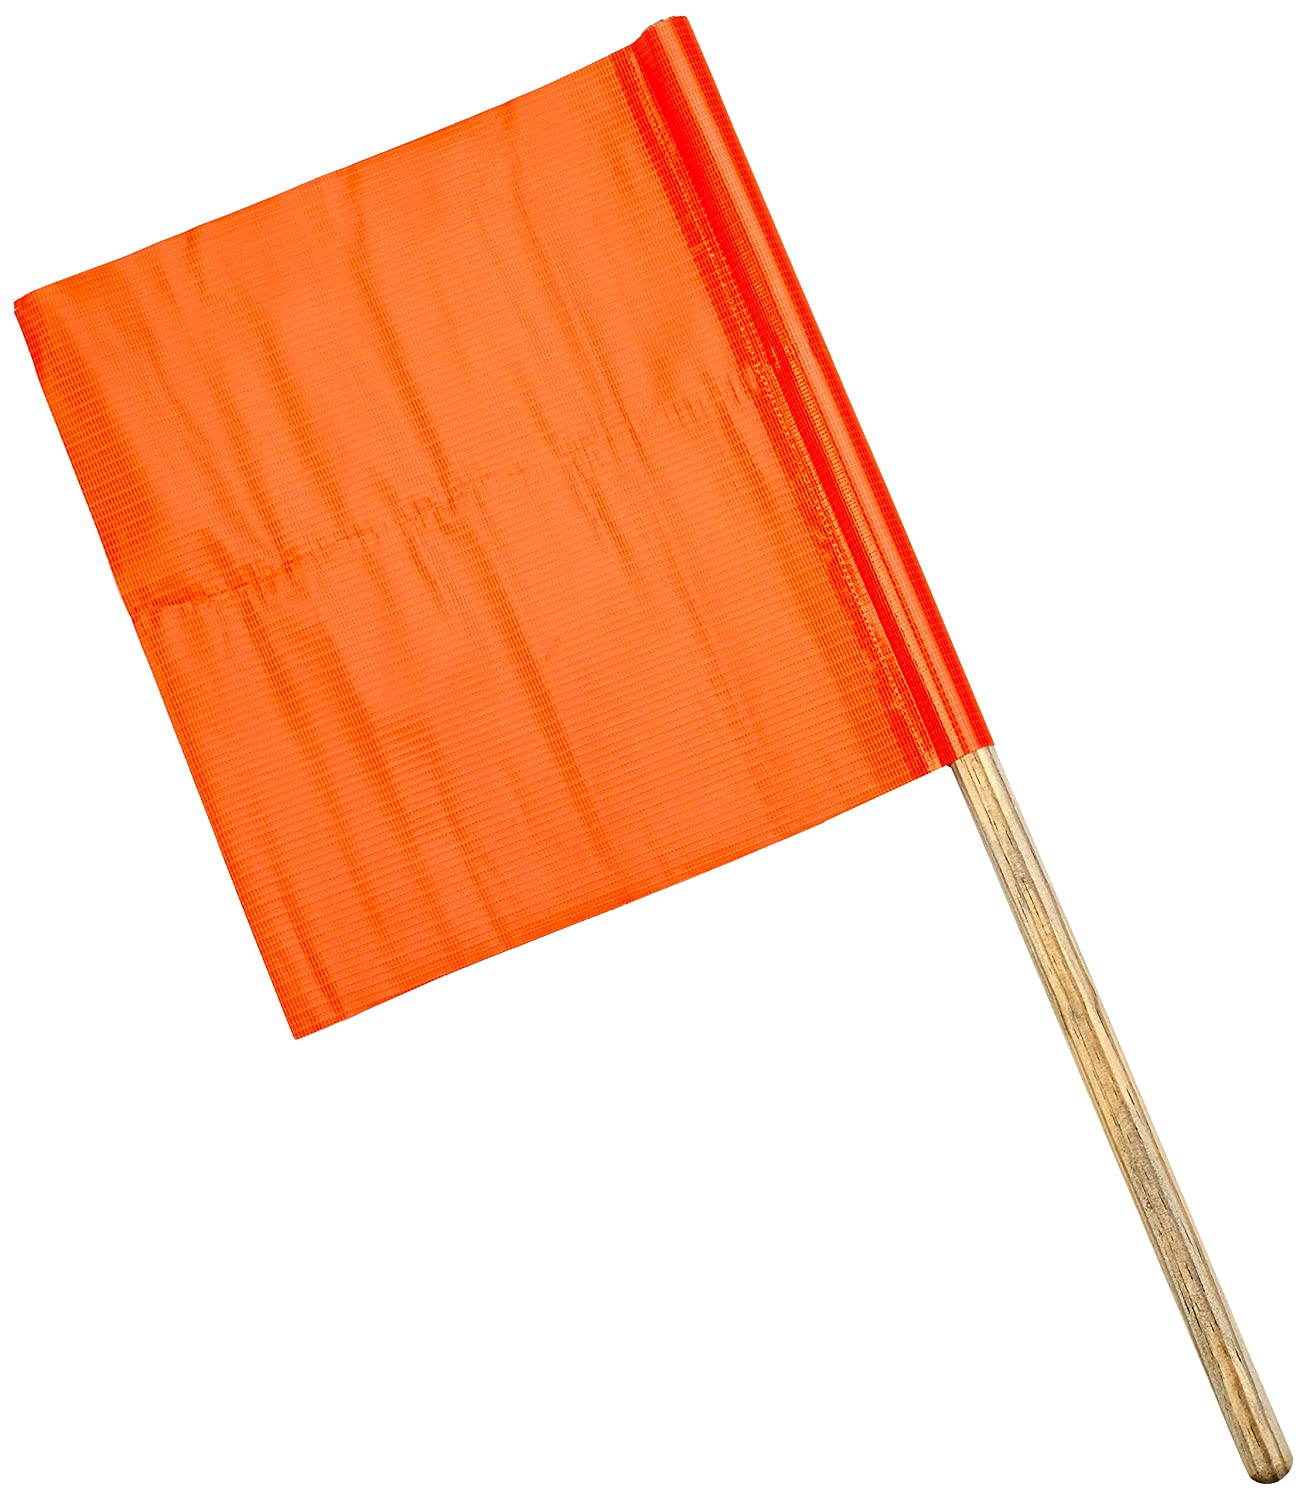 Standard Vinyl Highway Safety Flags - Workplace Safety